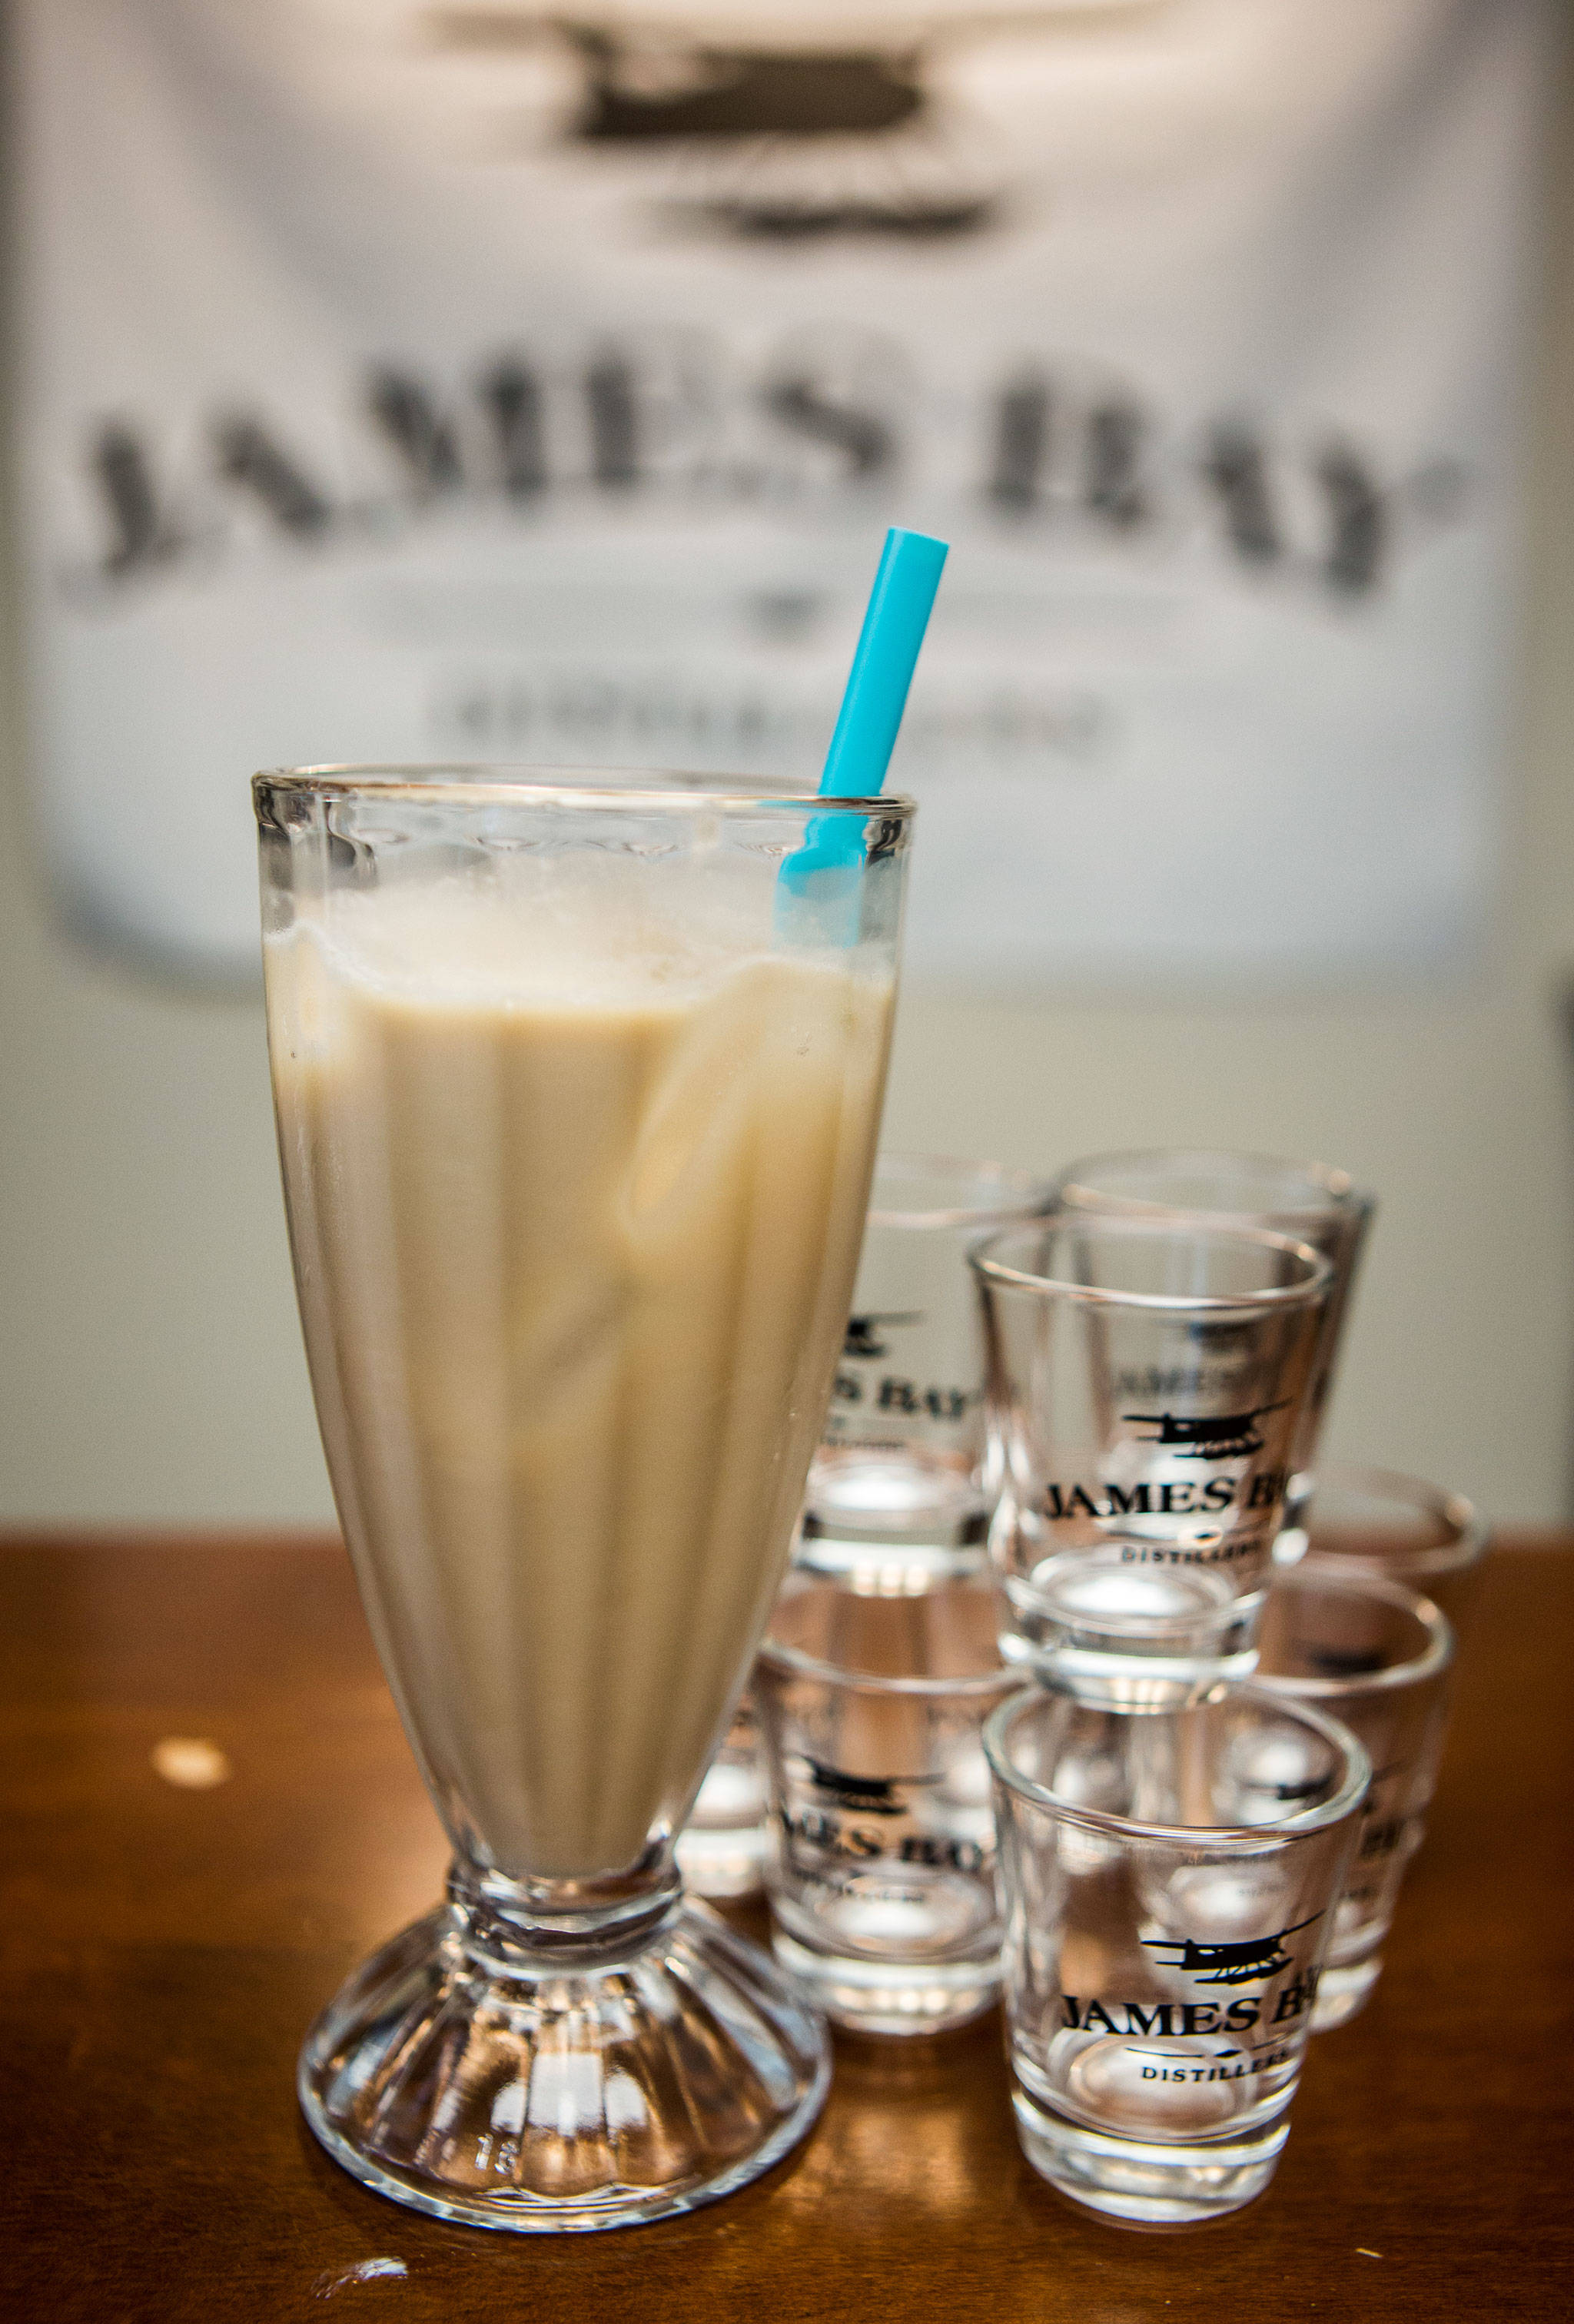 James Bay Distiller’s Whisky Rootbeer Float made with James Bay Galloping Goose Canadian Whisky, rootbeer, light cream and vanilla ice cream. (Olivia Vanni / The Herald)